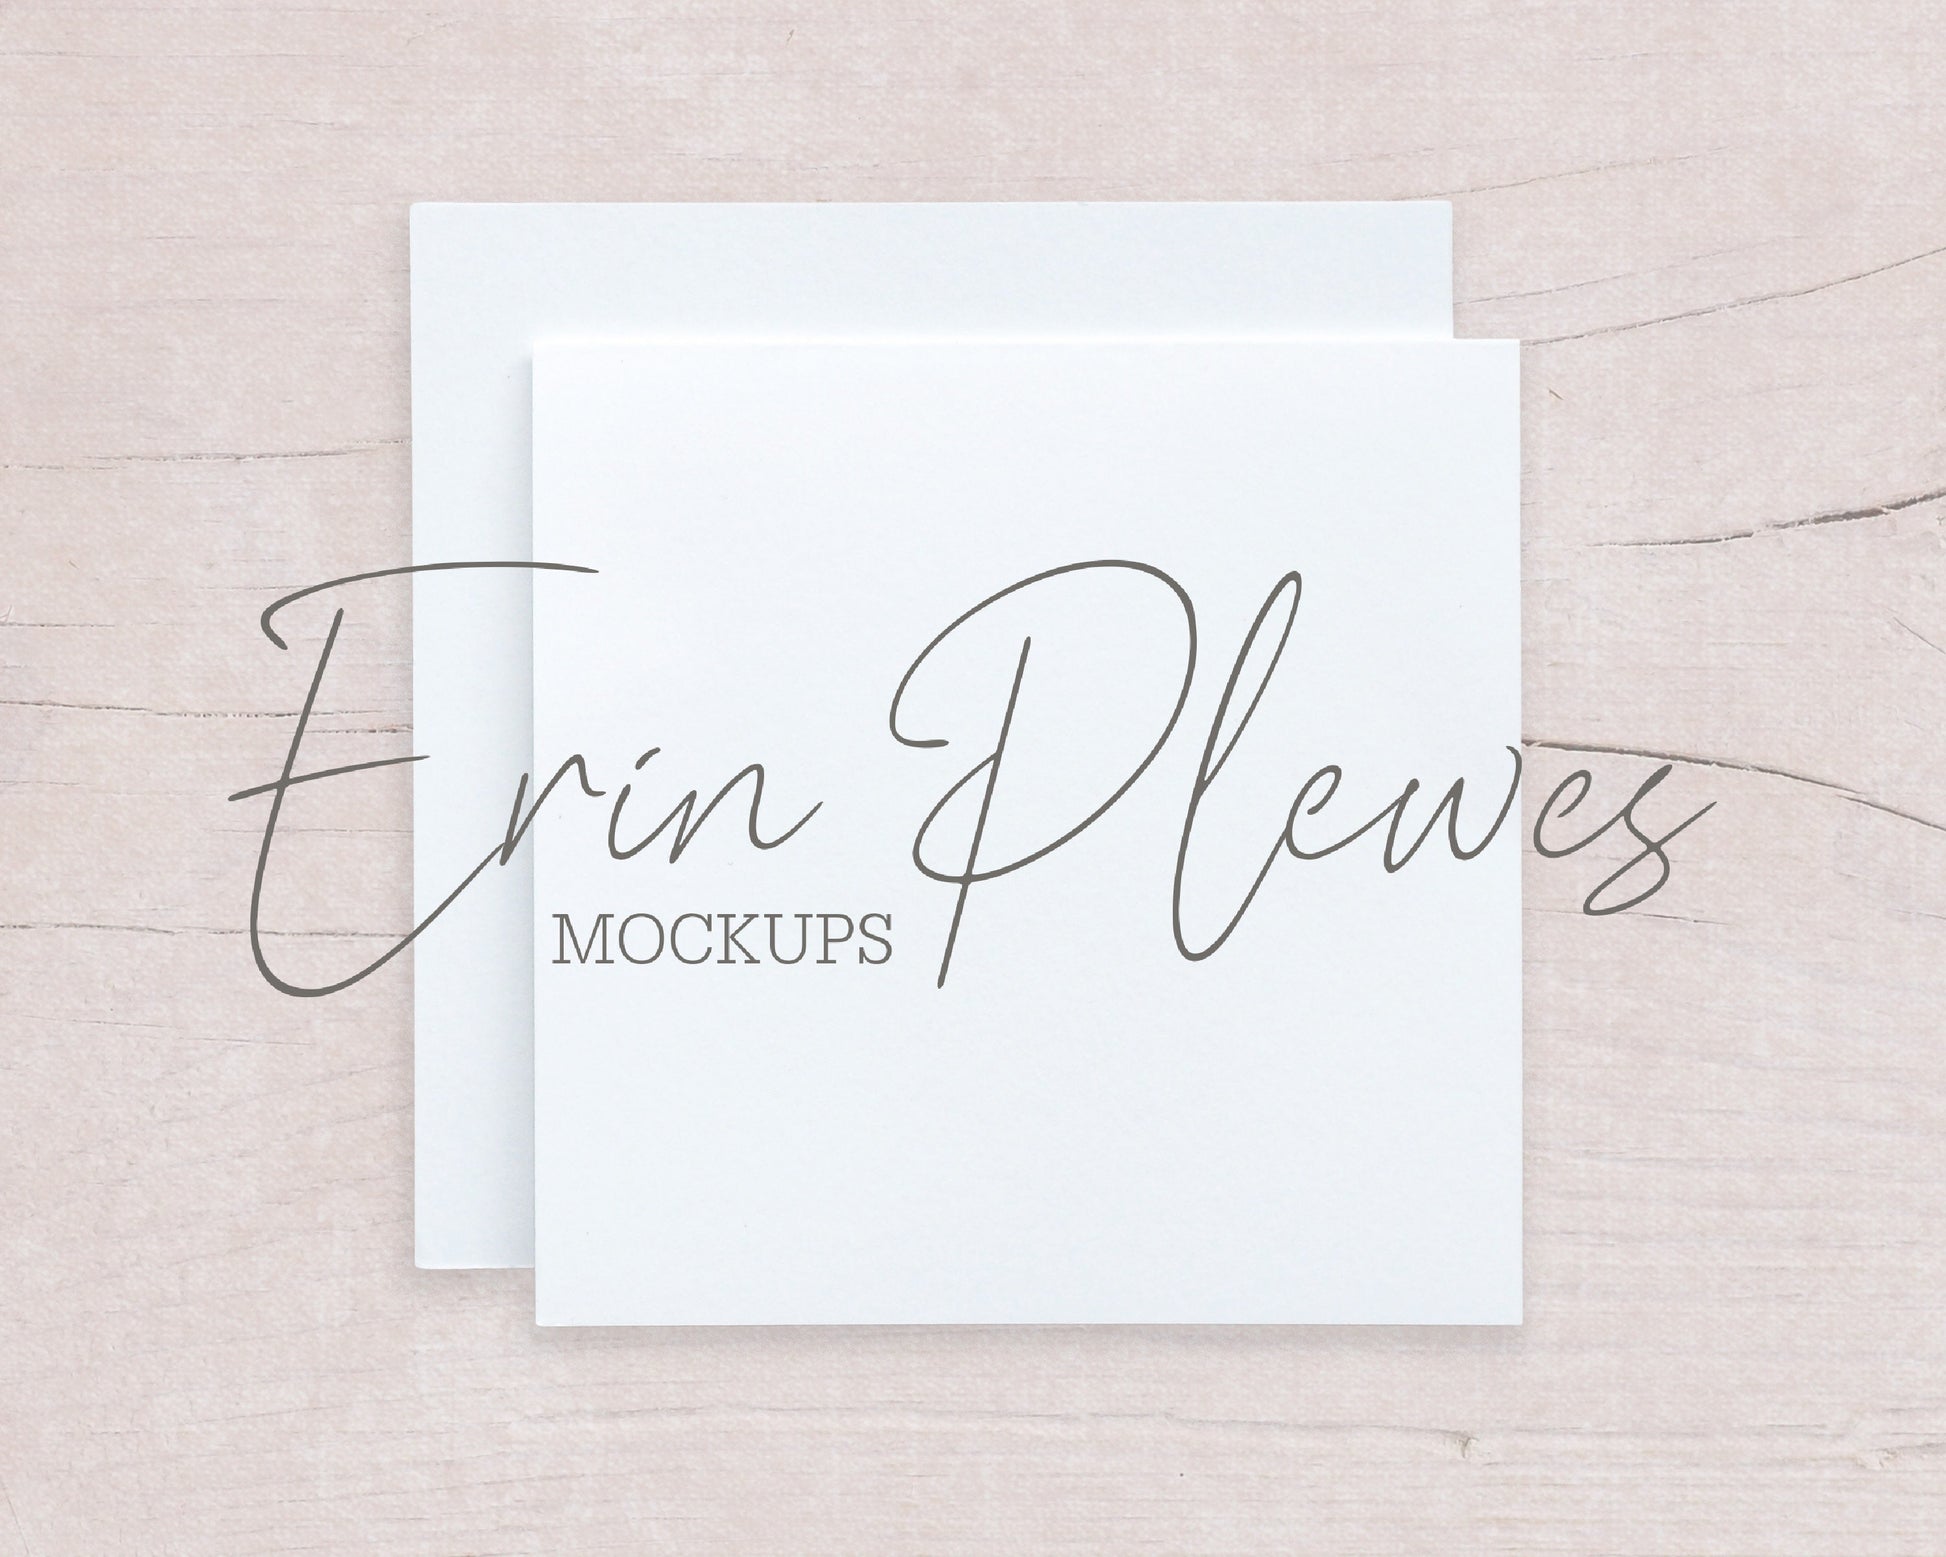 Square Card Mockup, Greeting Card Mock Up with White Envelope on Beige Wood, Square Stationery Flat Lay, Jpeg Instant Digital Download